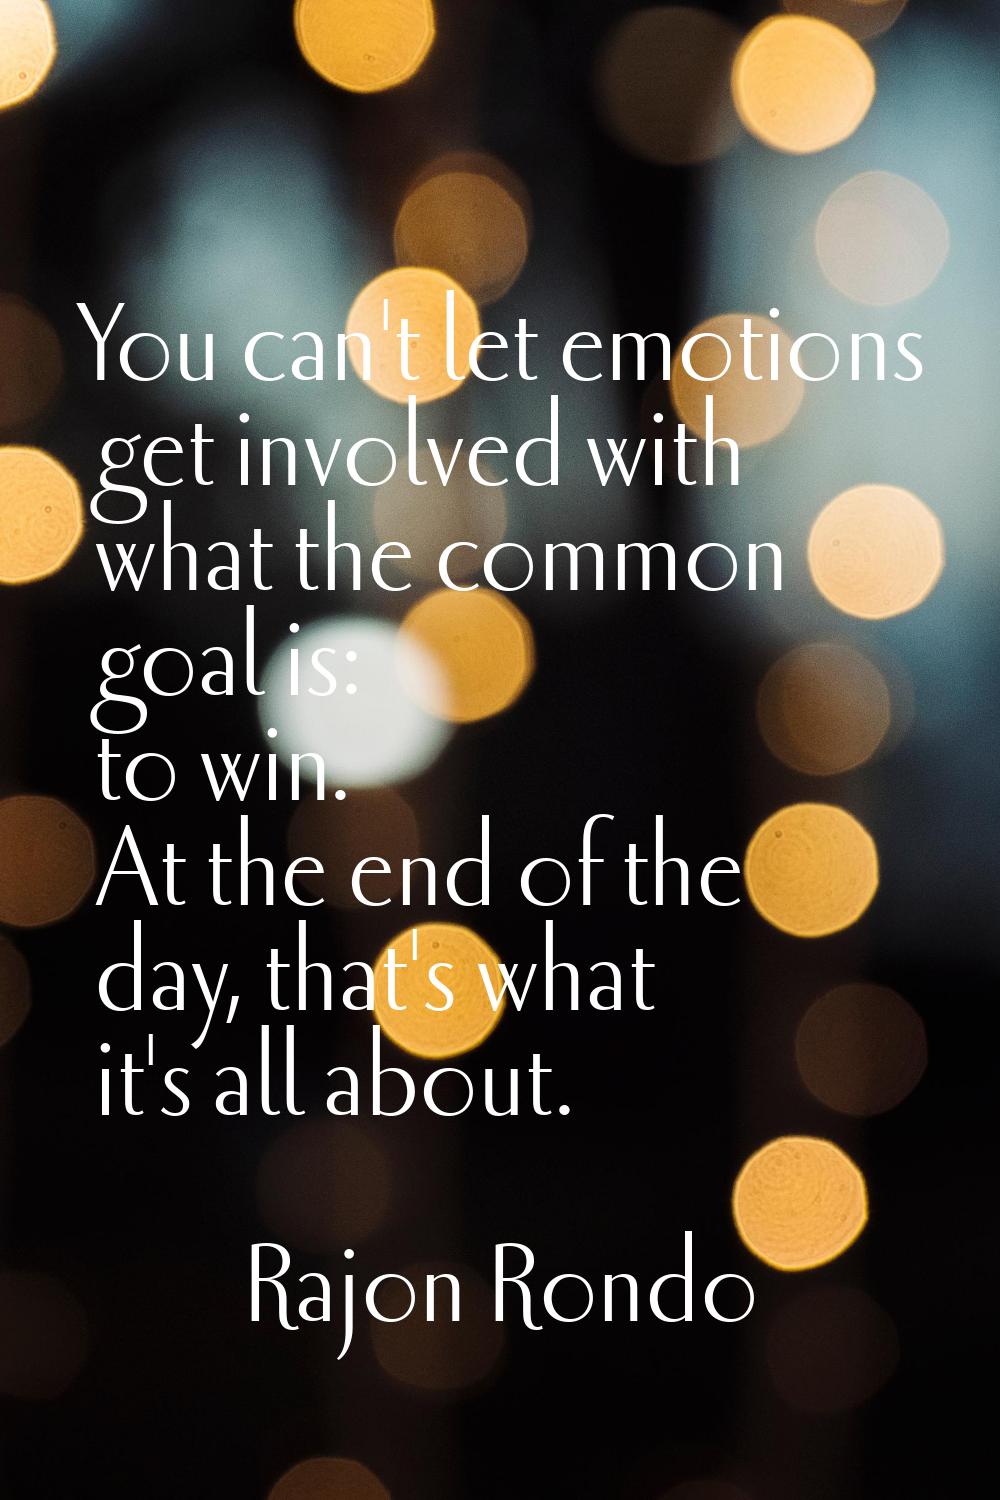 You can't let emotions get involved with what the common goal is: to win. At the end of the day, th